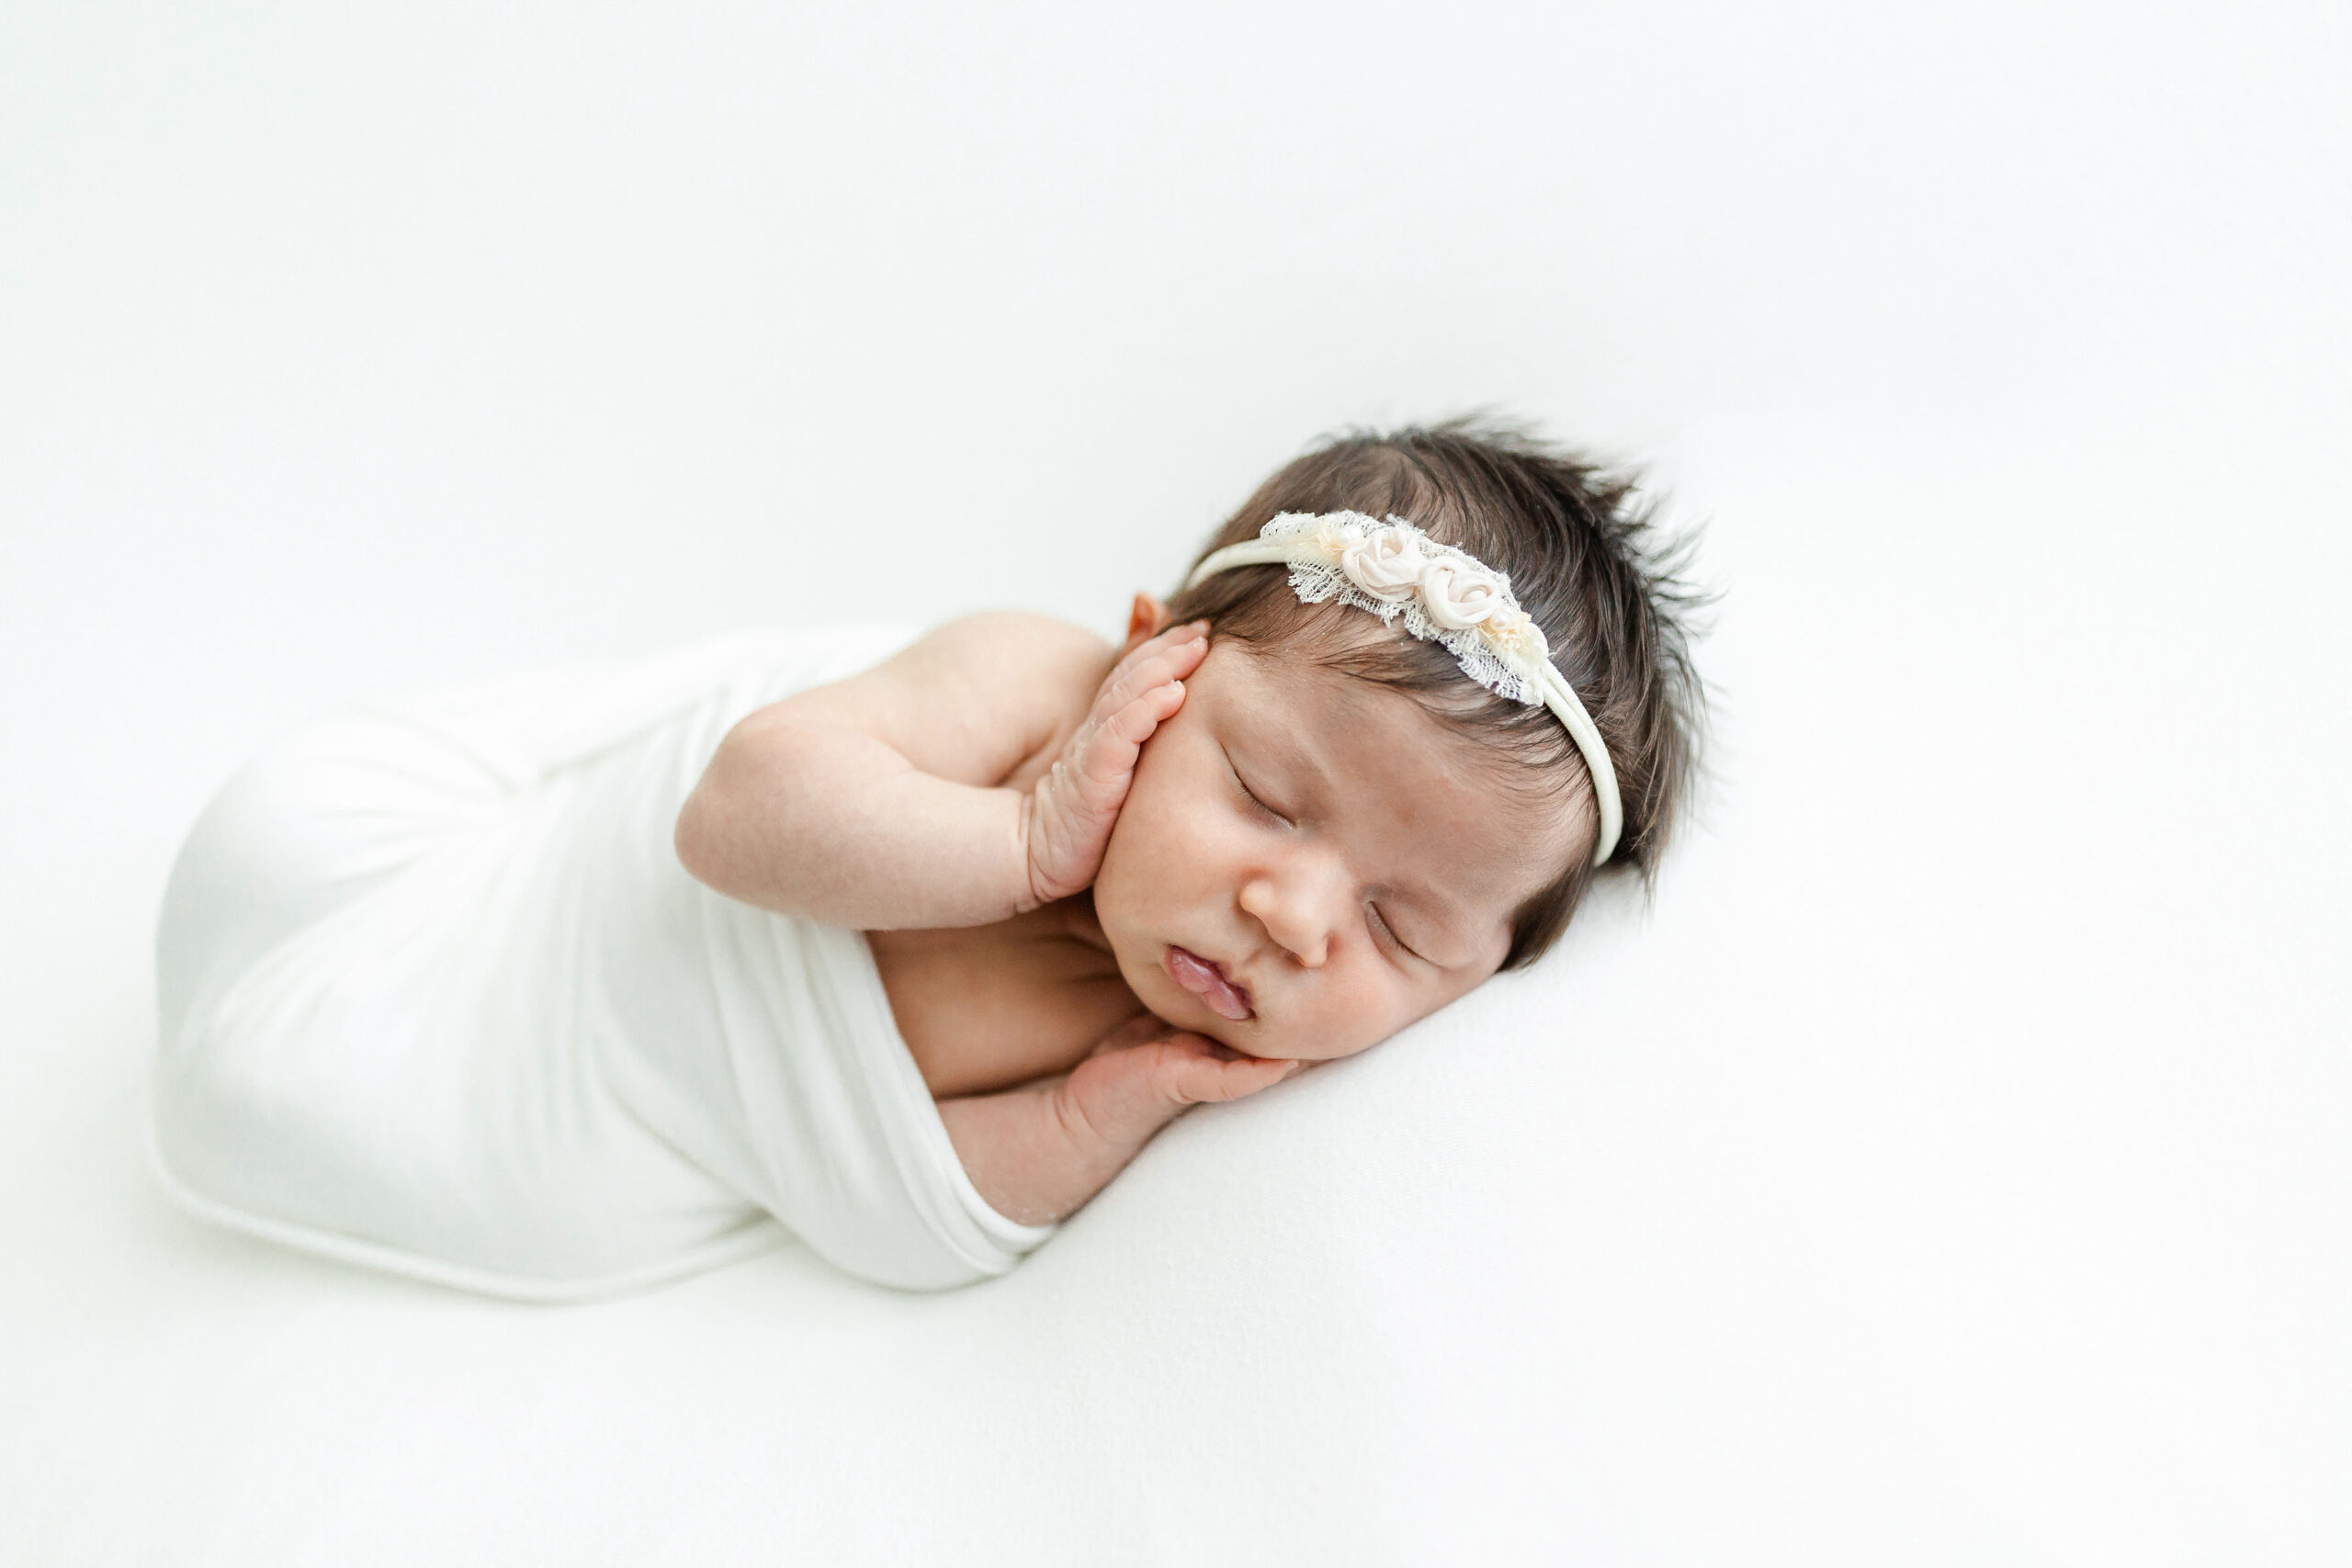 A newborn baby sleeps in a white swaddle with hands on her face